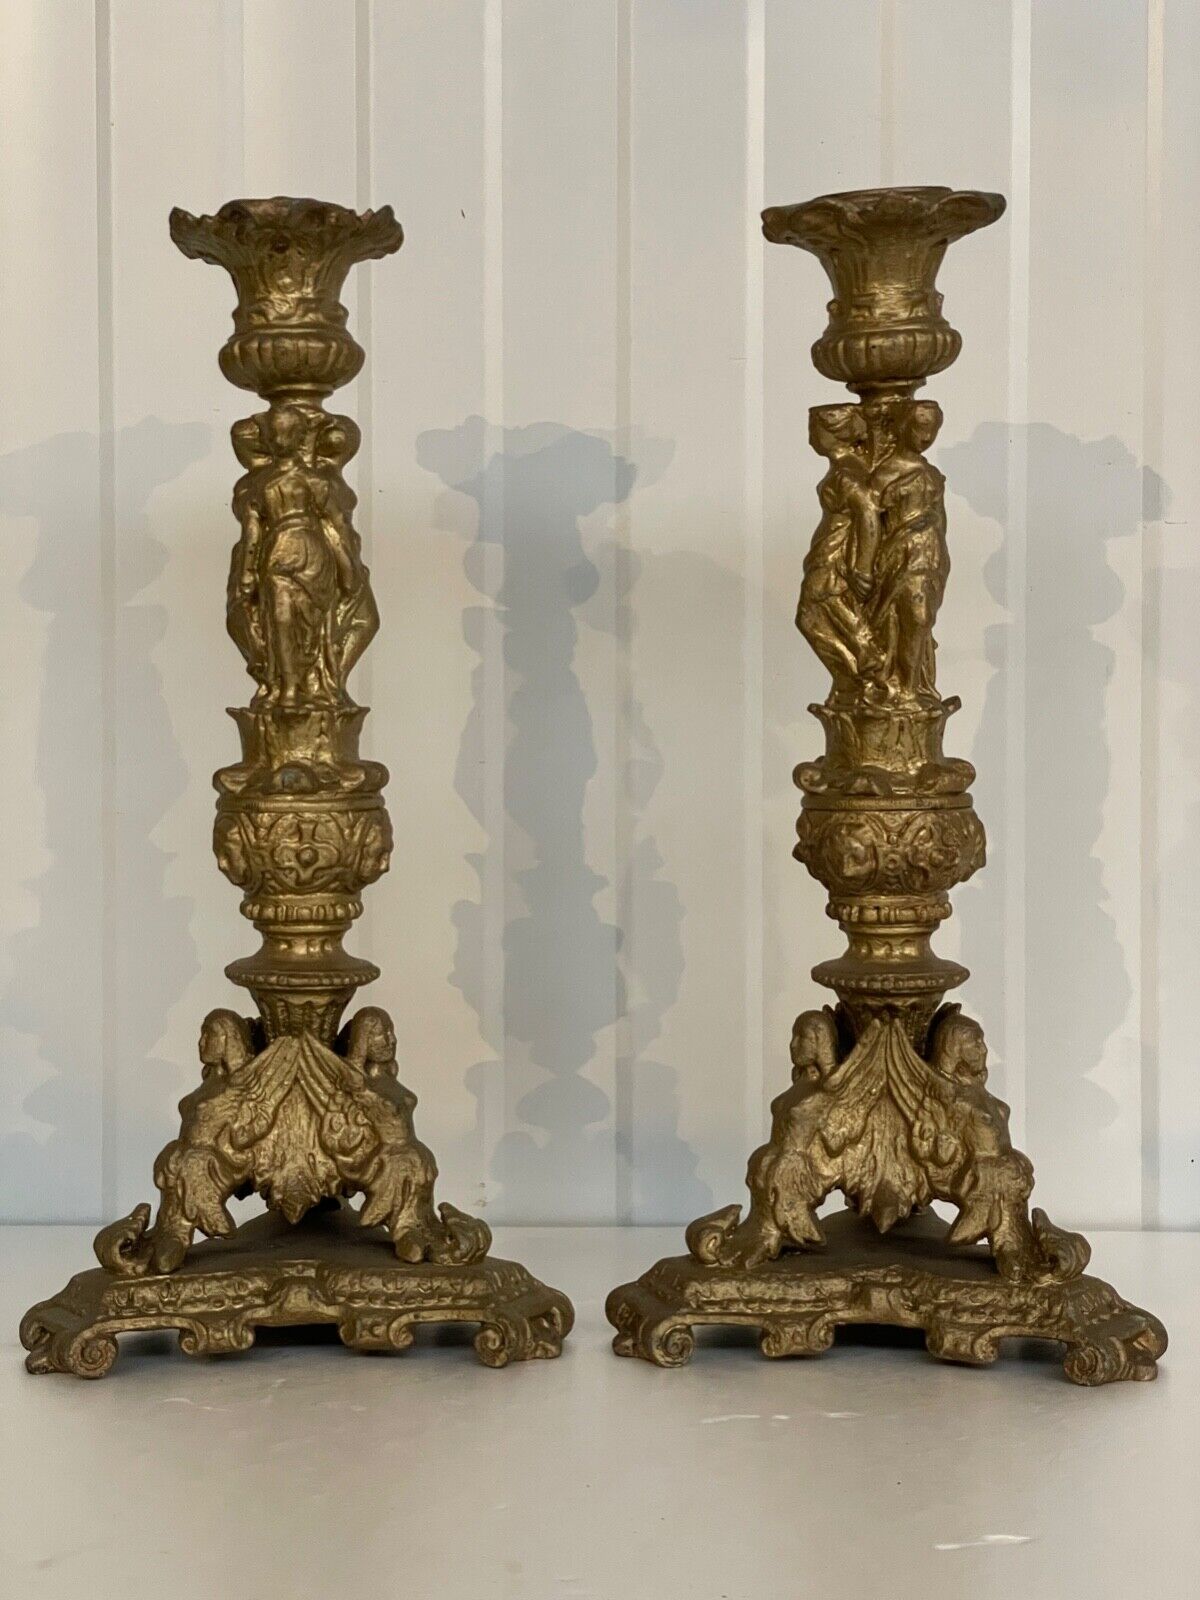 SALE  RARE Pair of Gothic Revival Candlesticks with Angels